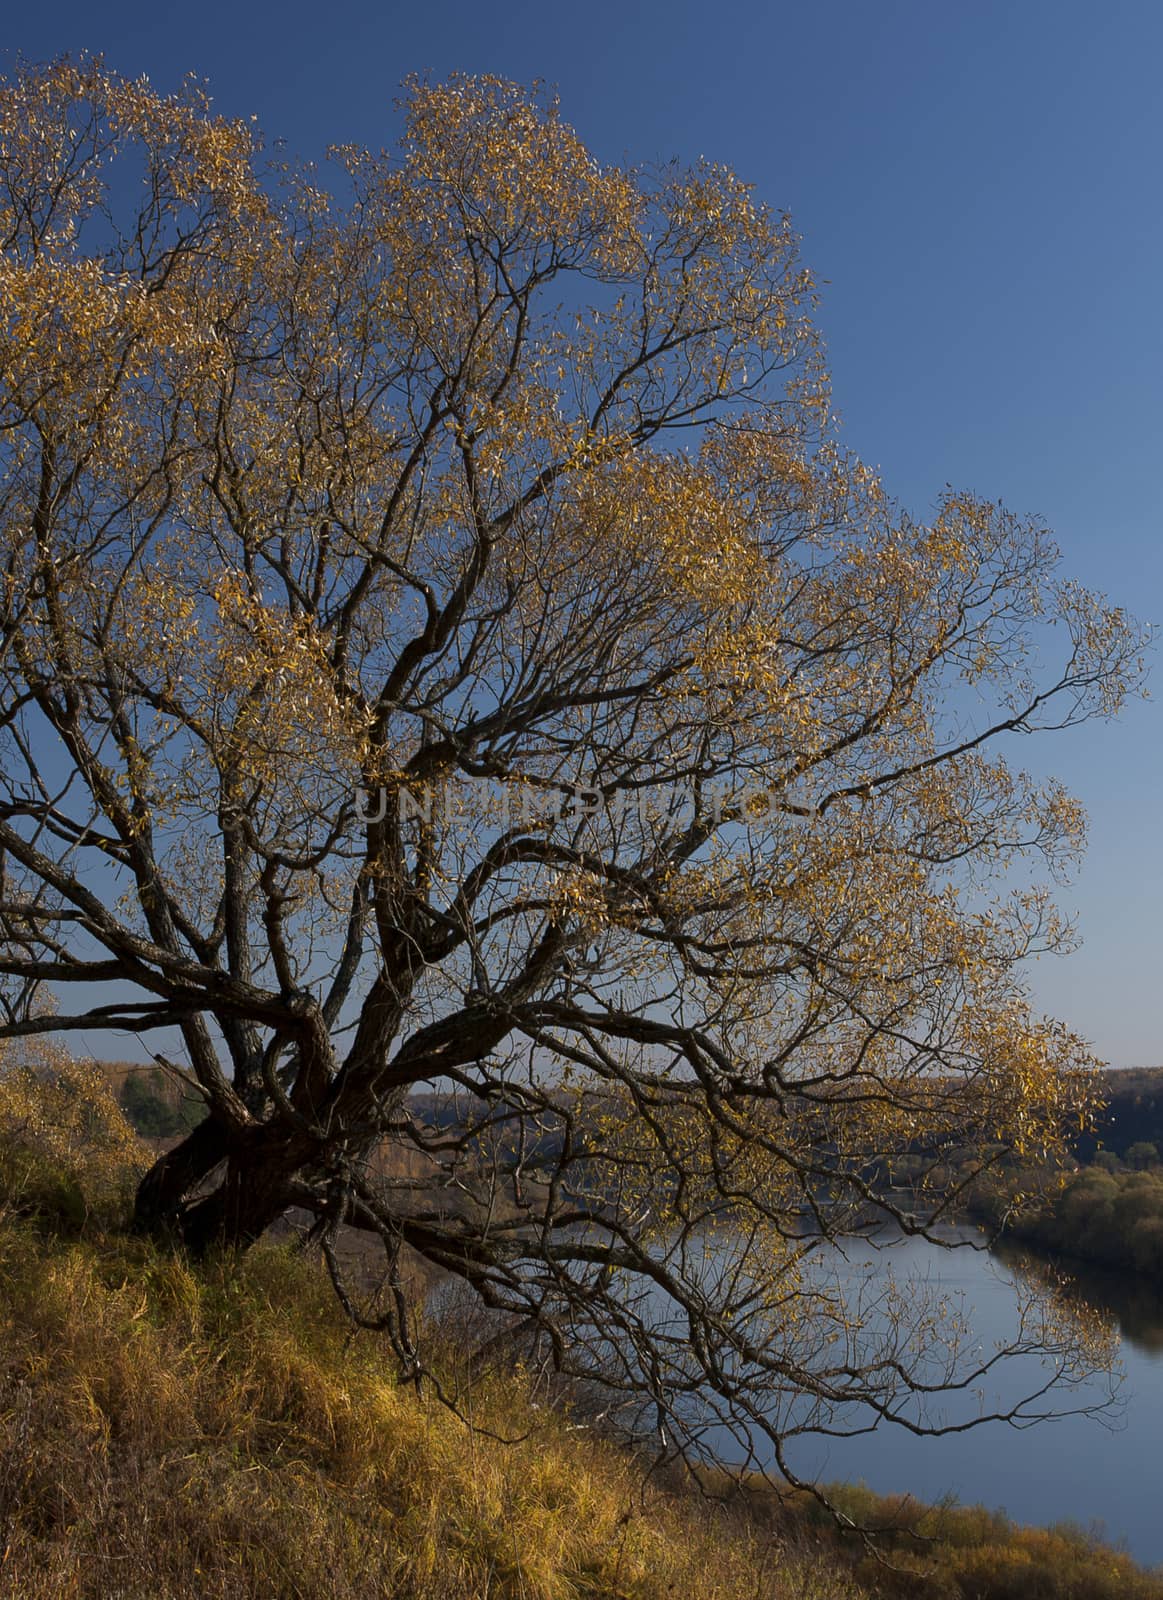 Autumn tree on a high bank of the river.